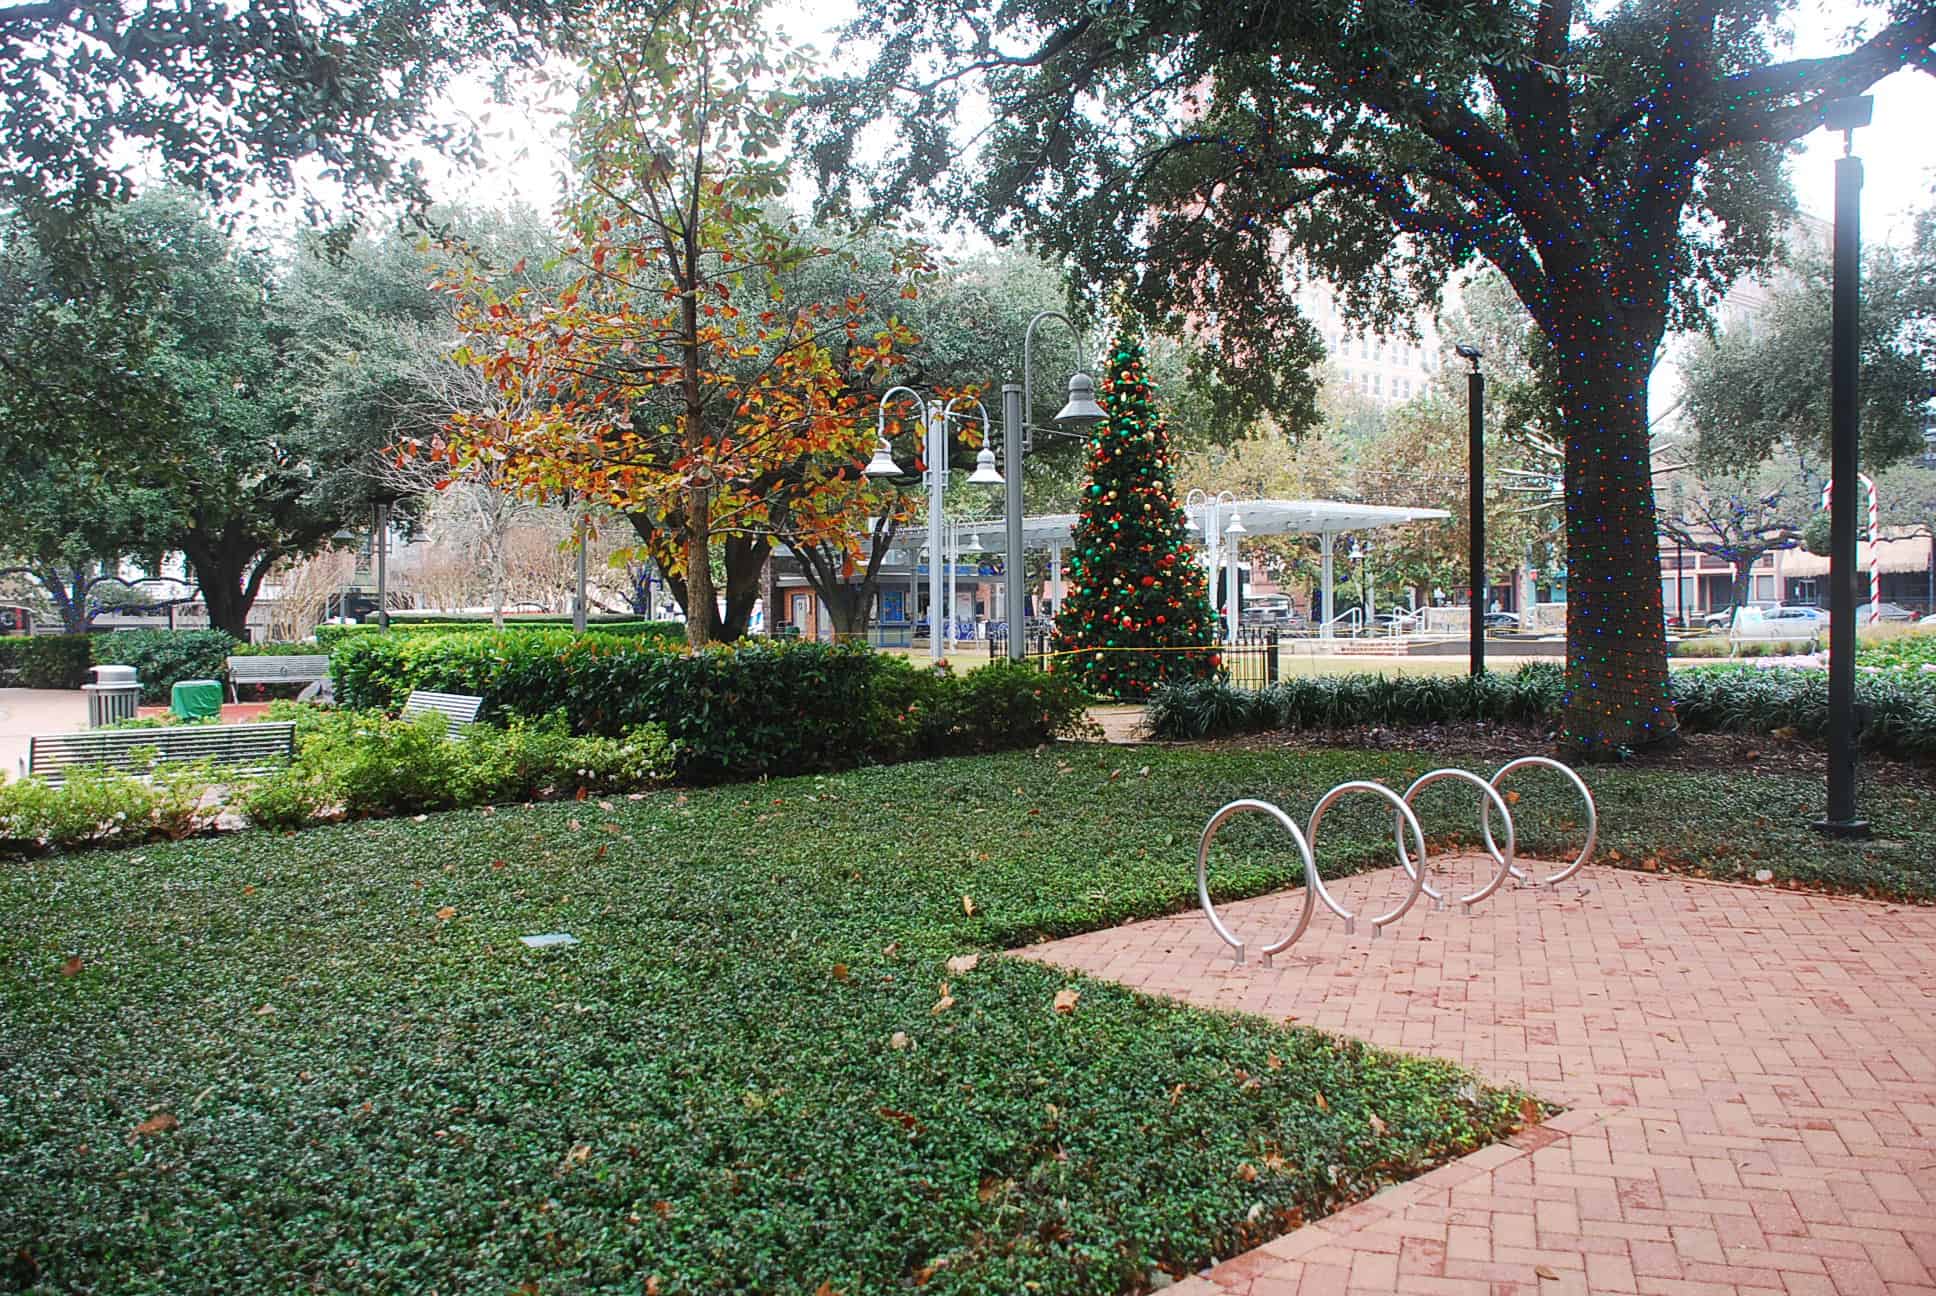 Market Square Park Decorated for the Holidays